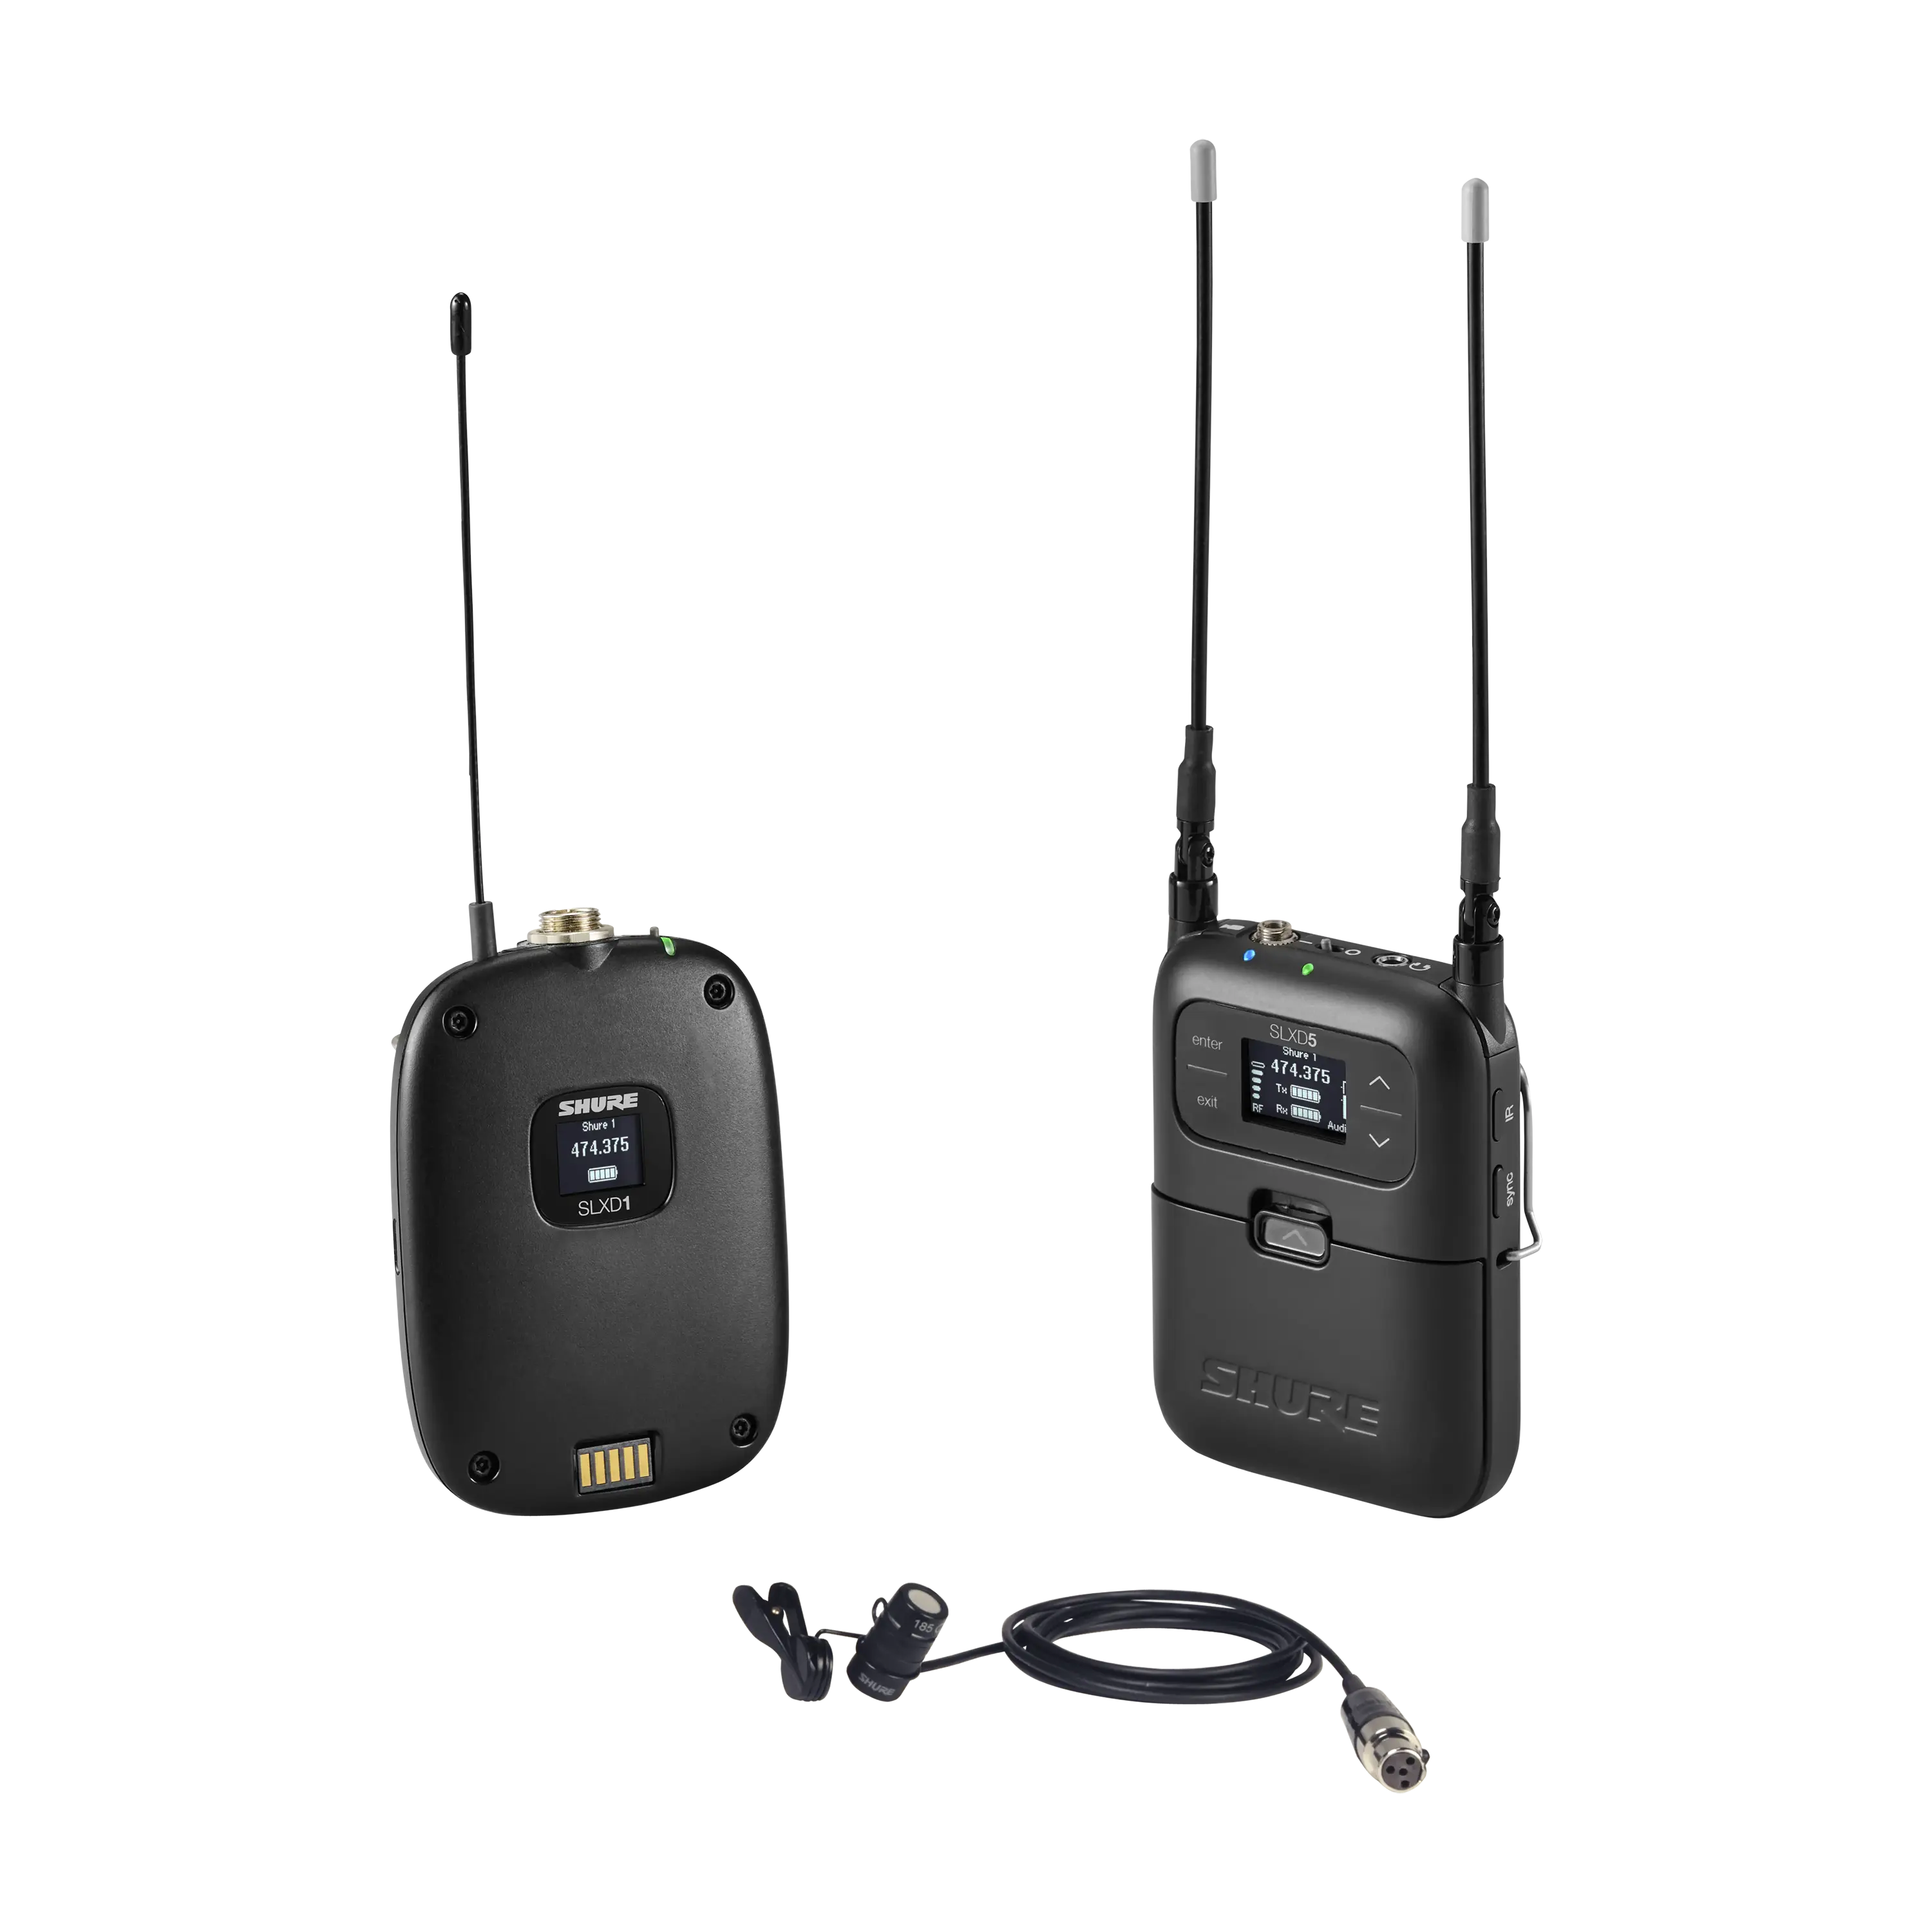 SLXD15/85-J52 Portable Wireless System With SLXD1 Bodypack Transmitter And WL185 Cardioid Lavalier Microphone